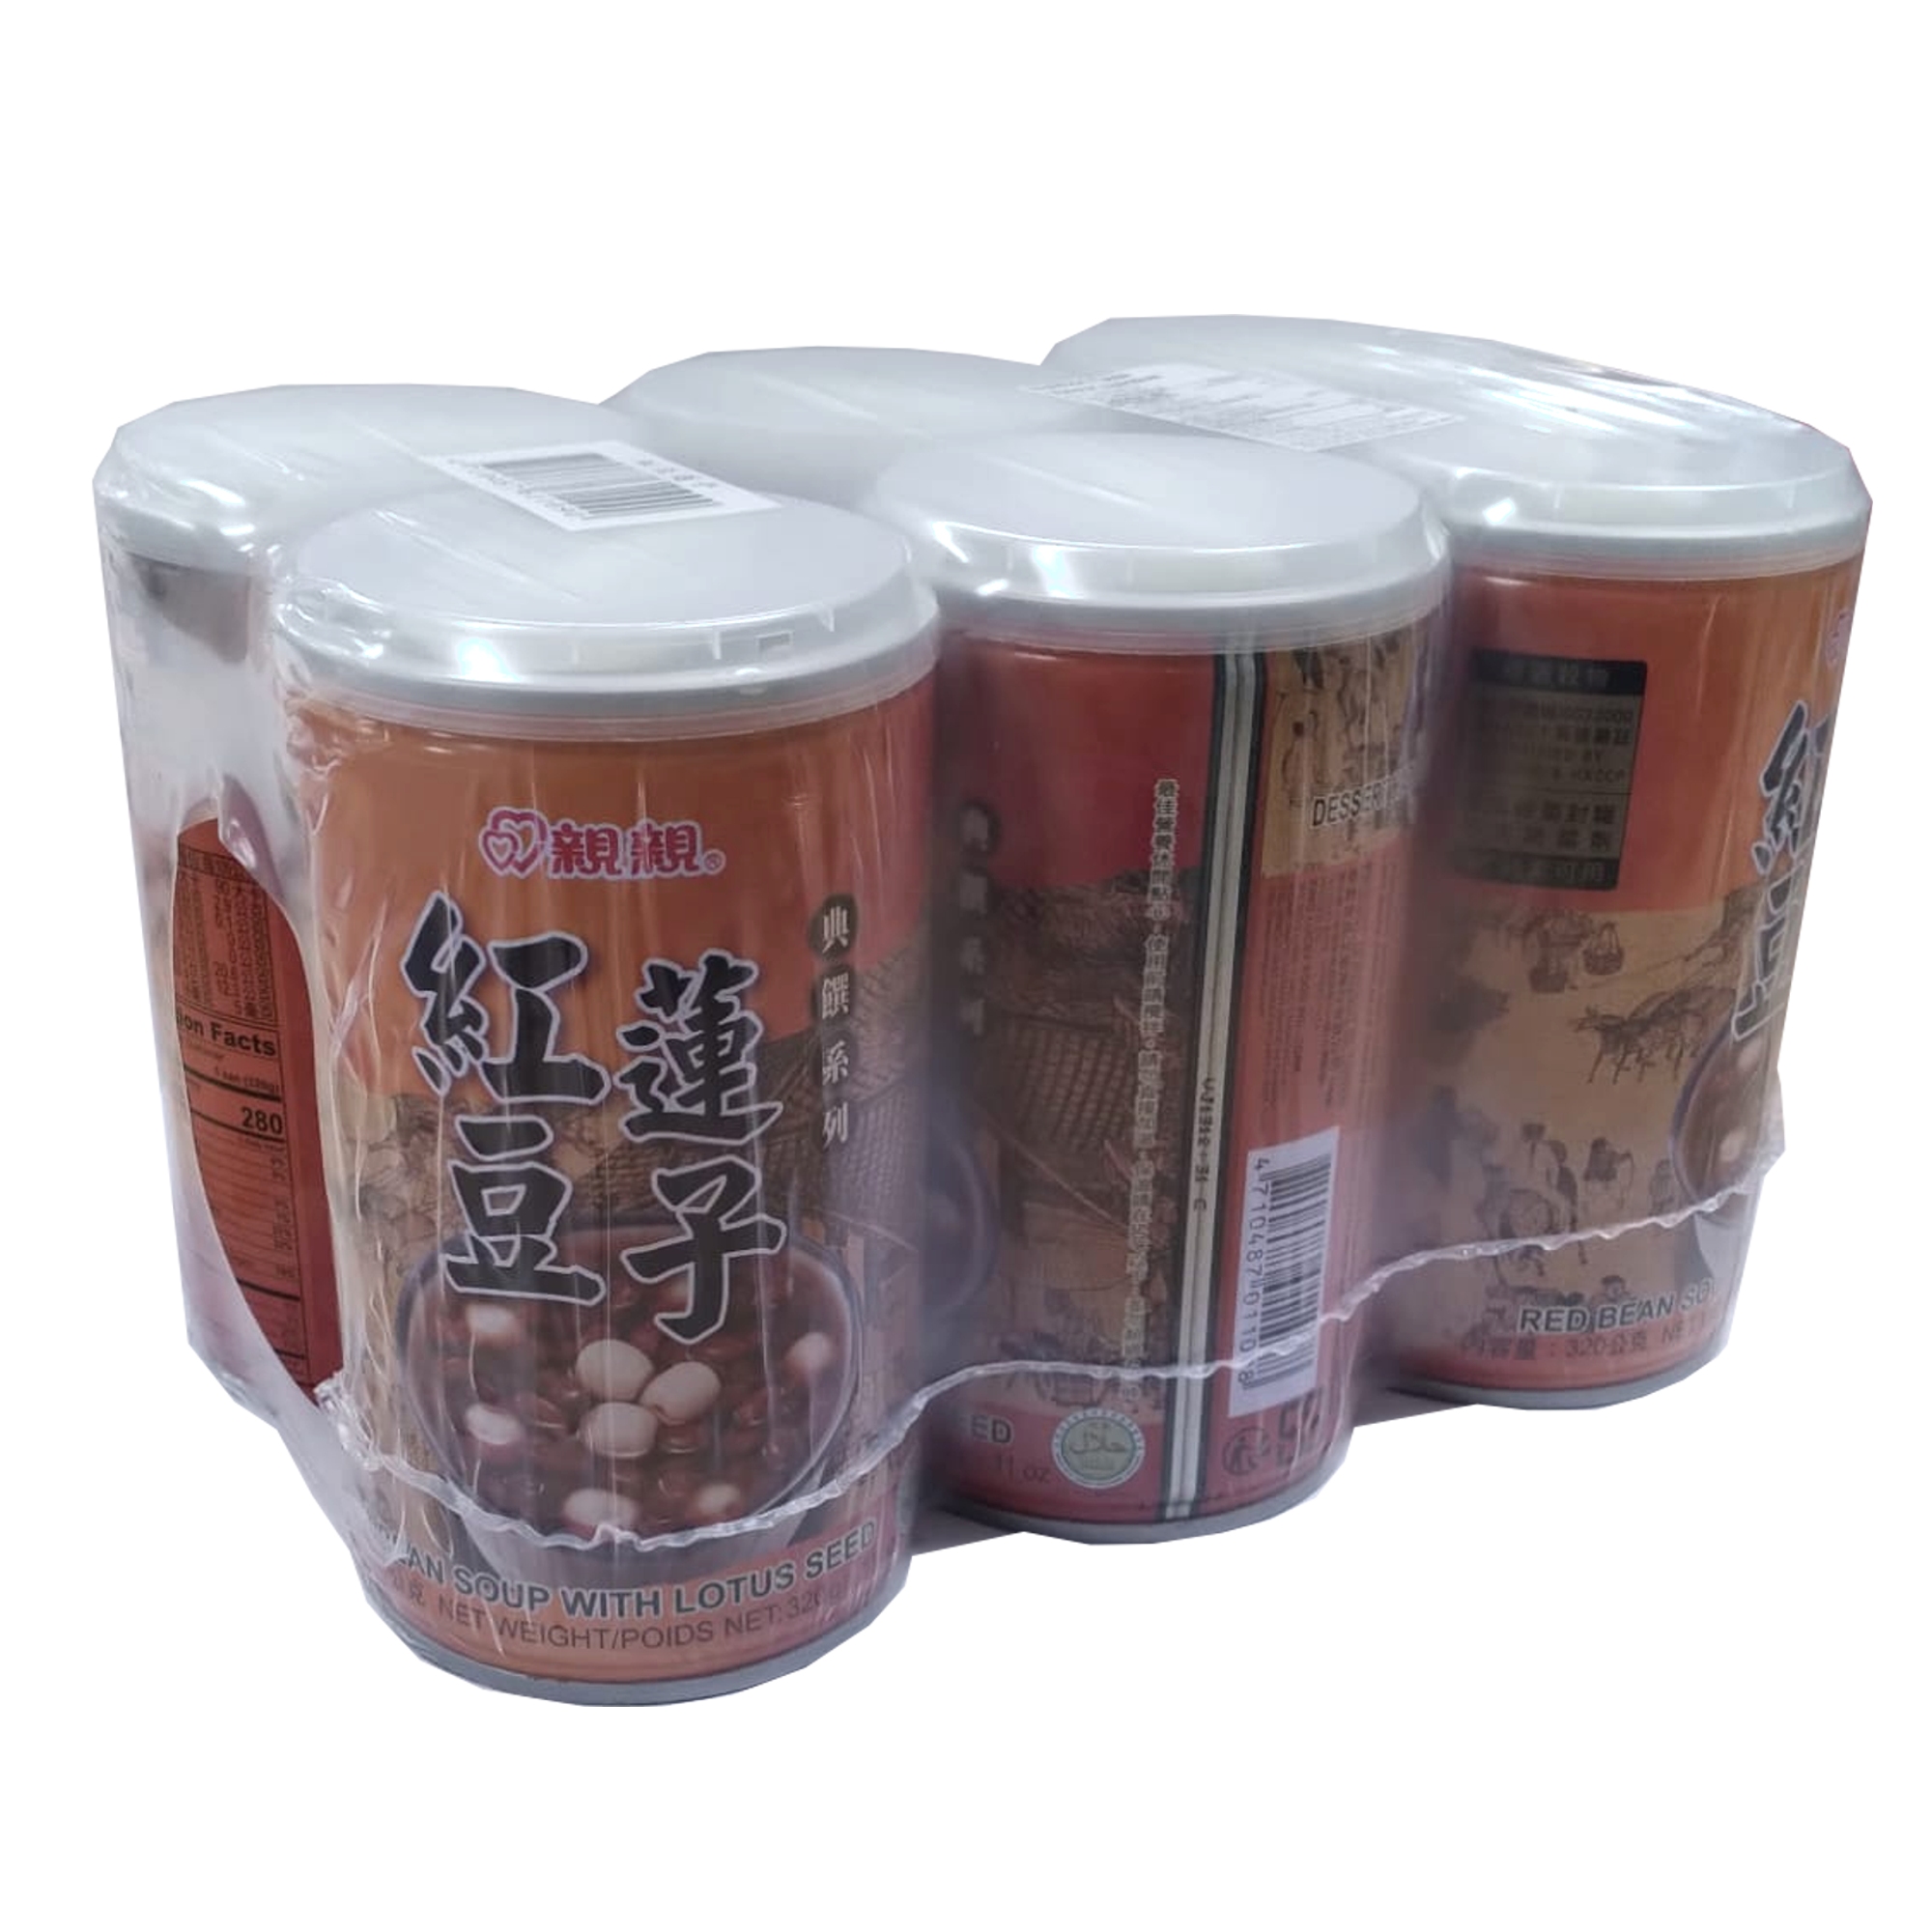 CC 6-CAN RED BEAN w/lotus SOUP DR110026